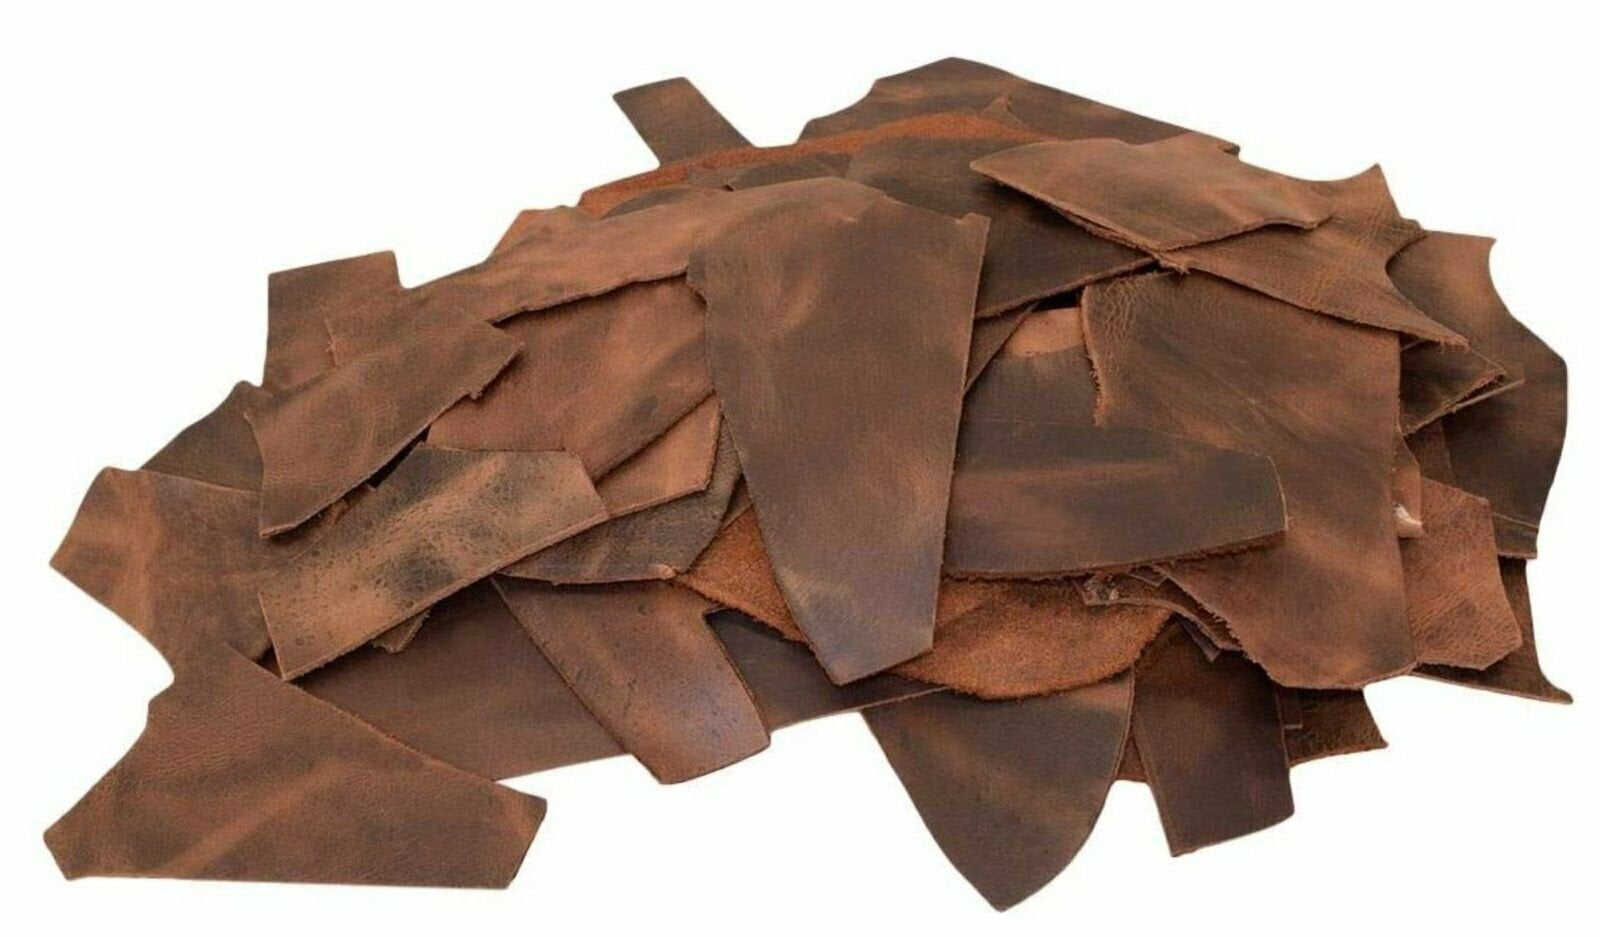 ELW Leather Company's 5lb Natural Vegetable Tan Cowhide Leather Scrap 